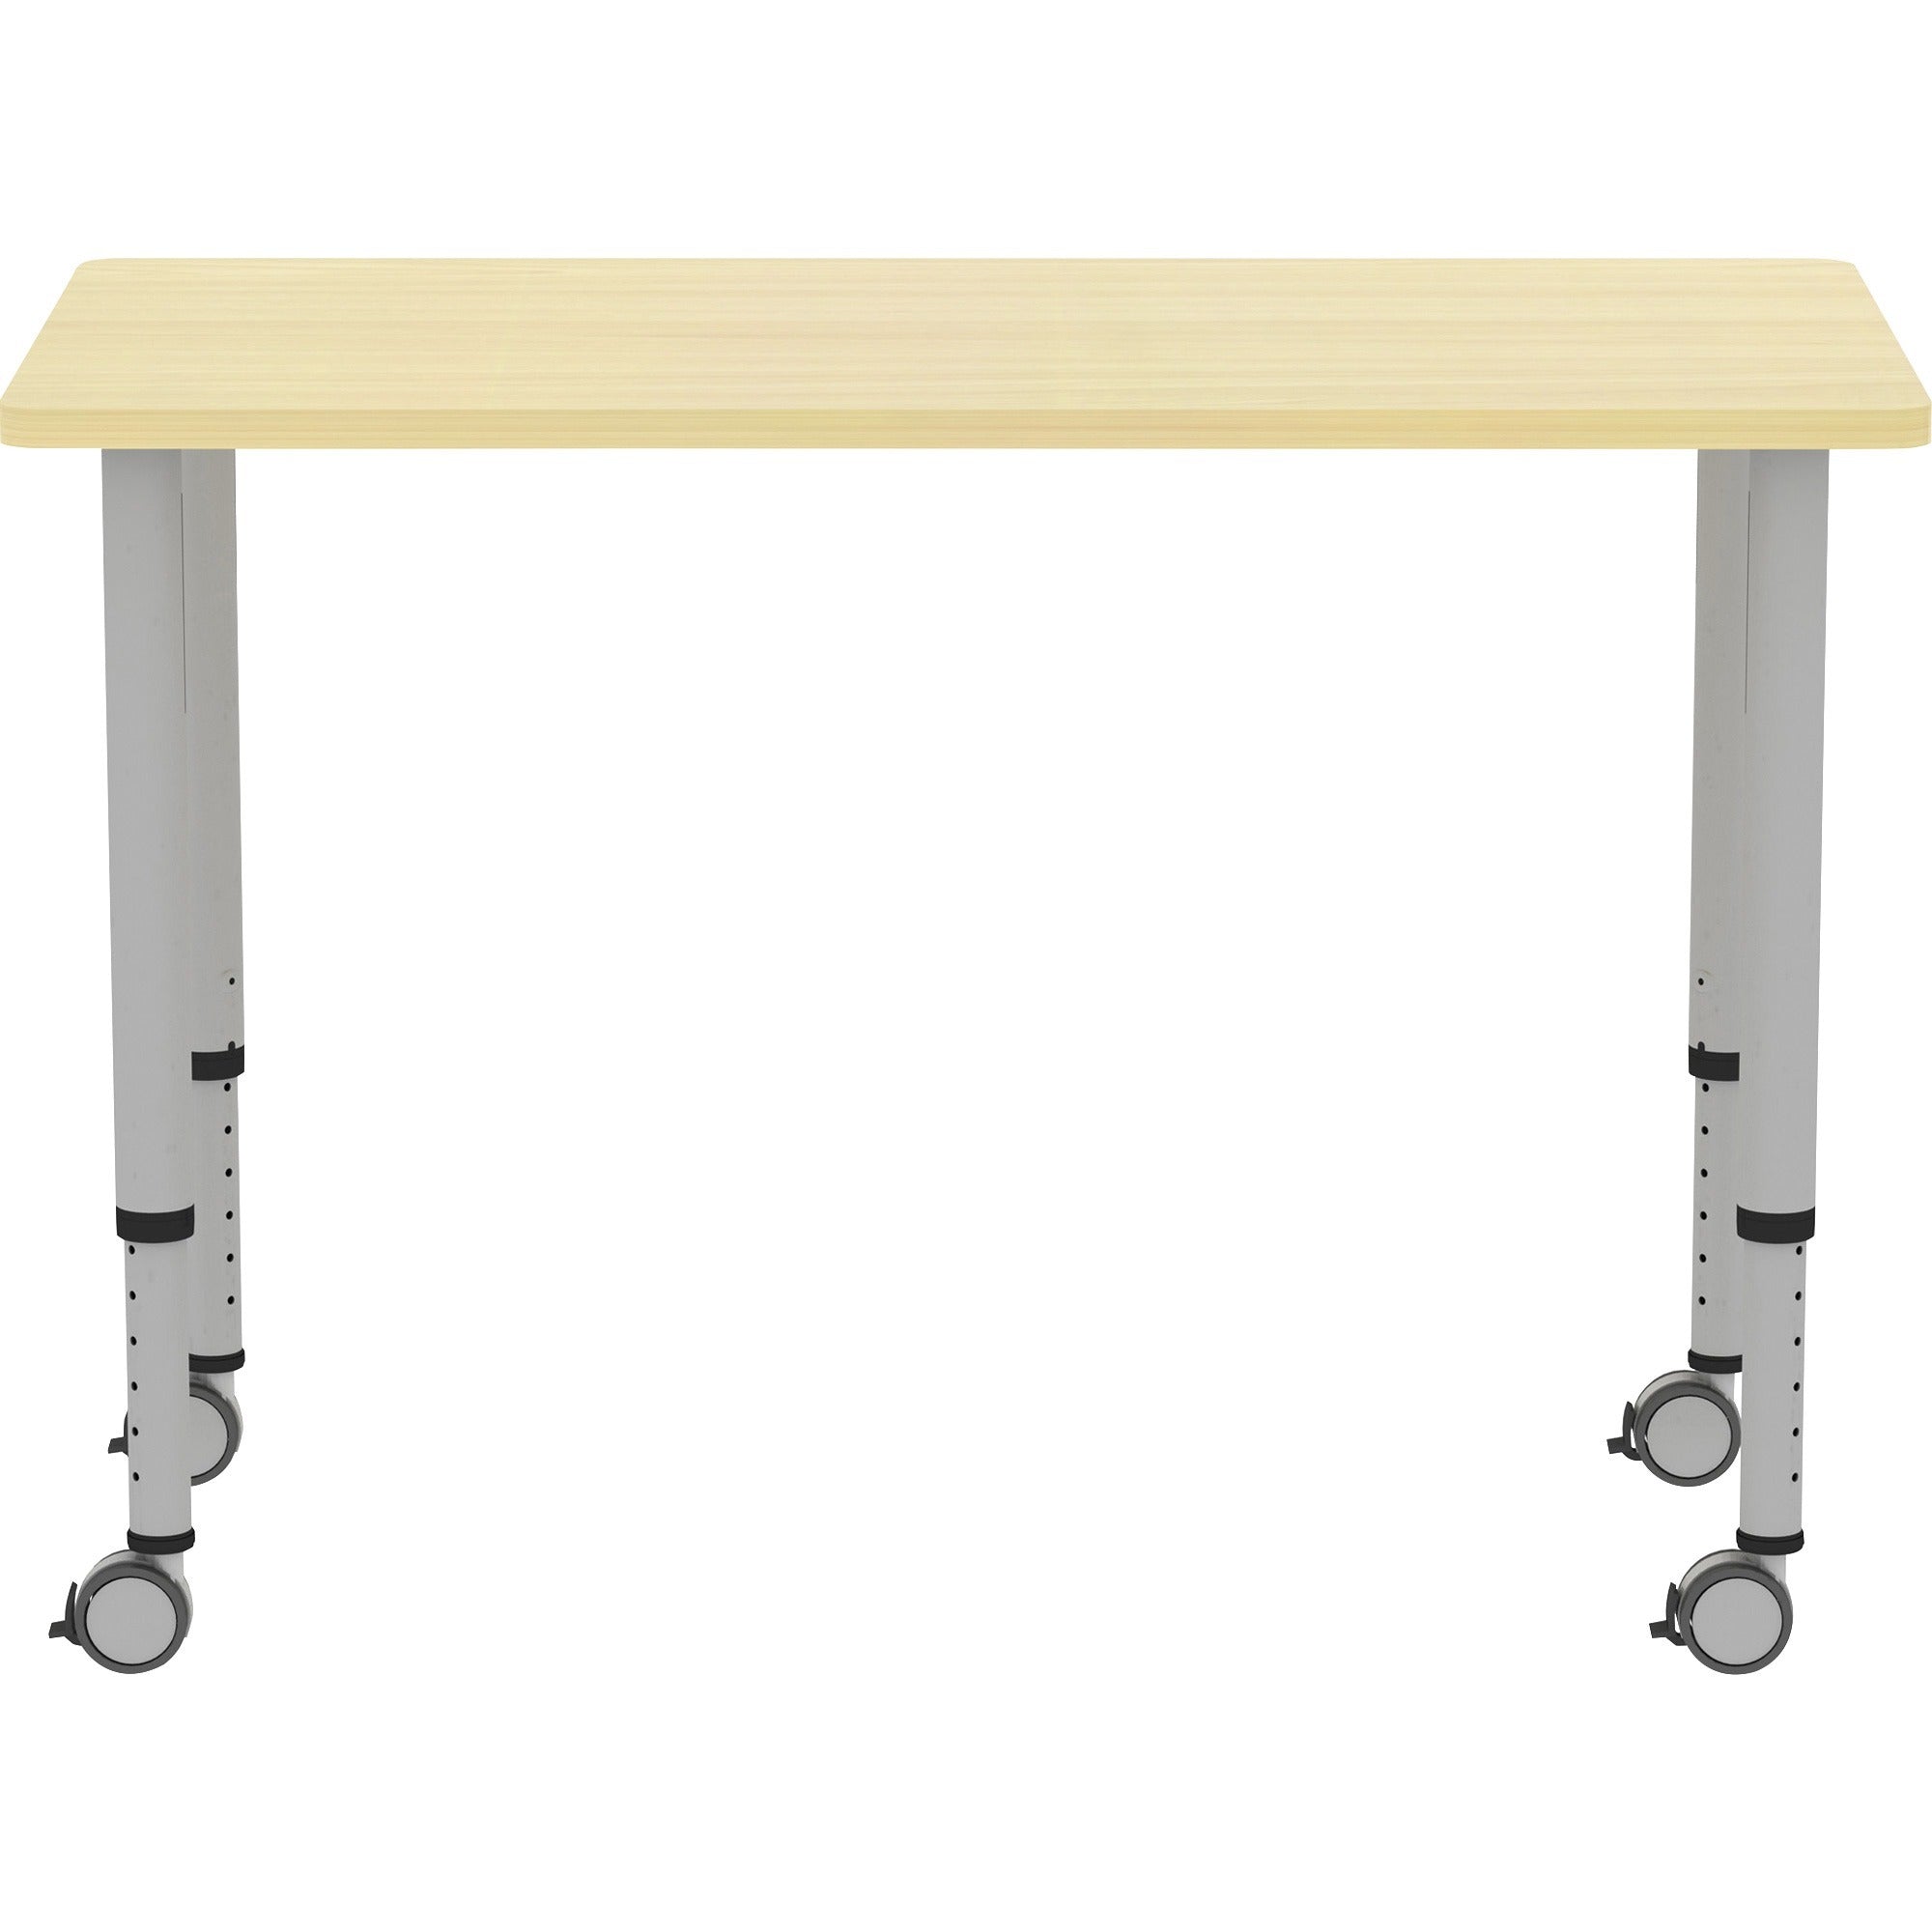 lorell-attune-height-adjustable-multipurpose-rectangular-table-for-table-toprectangle-top-adjustable-height-2662-to-3362-adjustment-x-48-table-top-width-x-2362-table-top-depth-3362-height-assembly-required-laminated-maple-la_llr69582 - 5